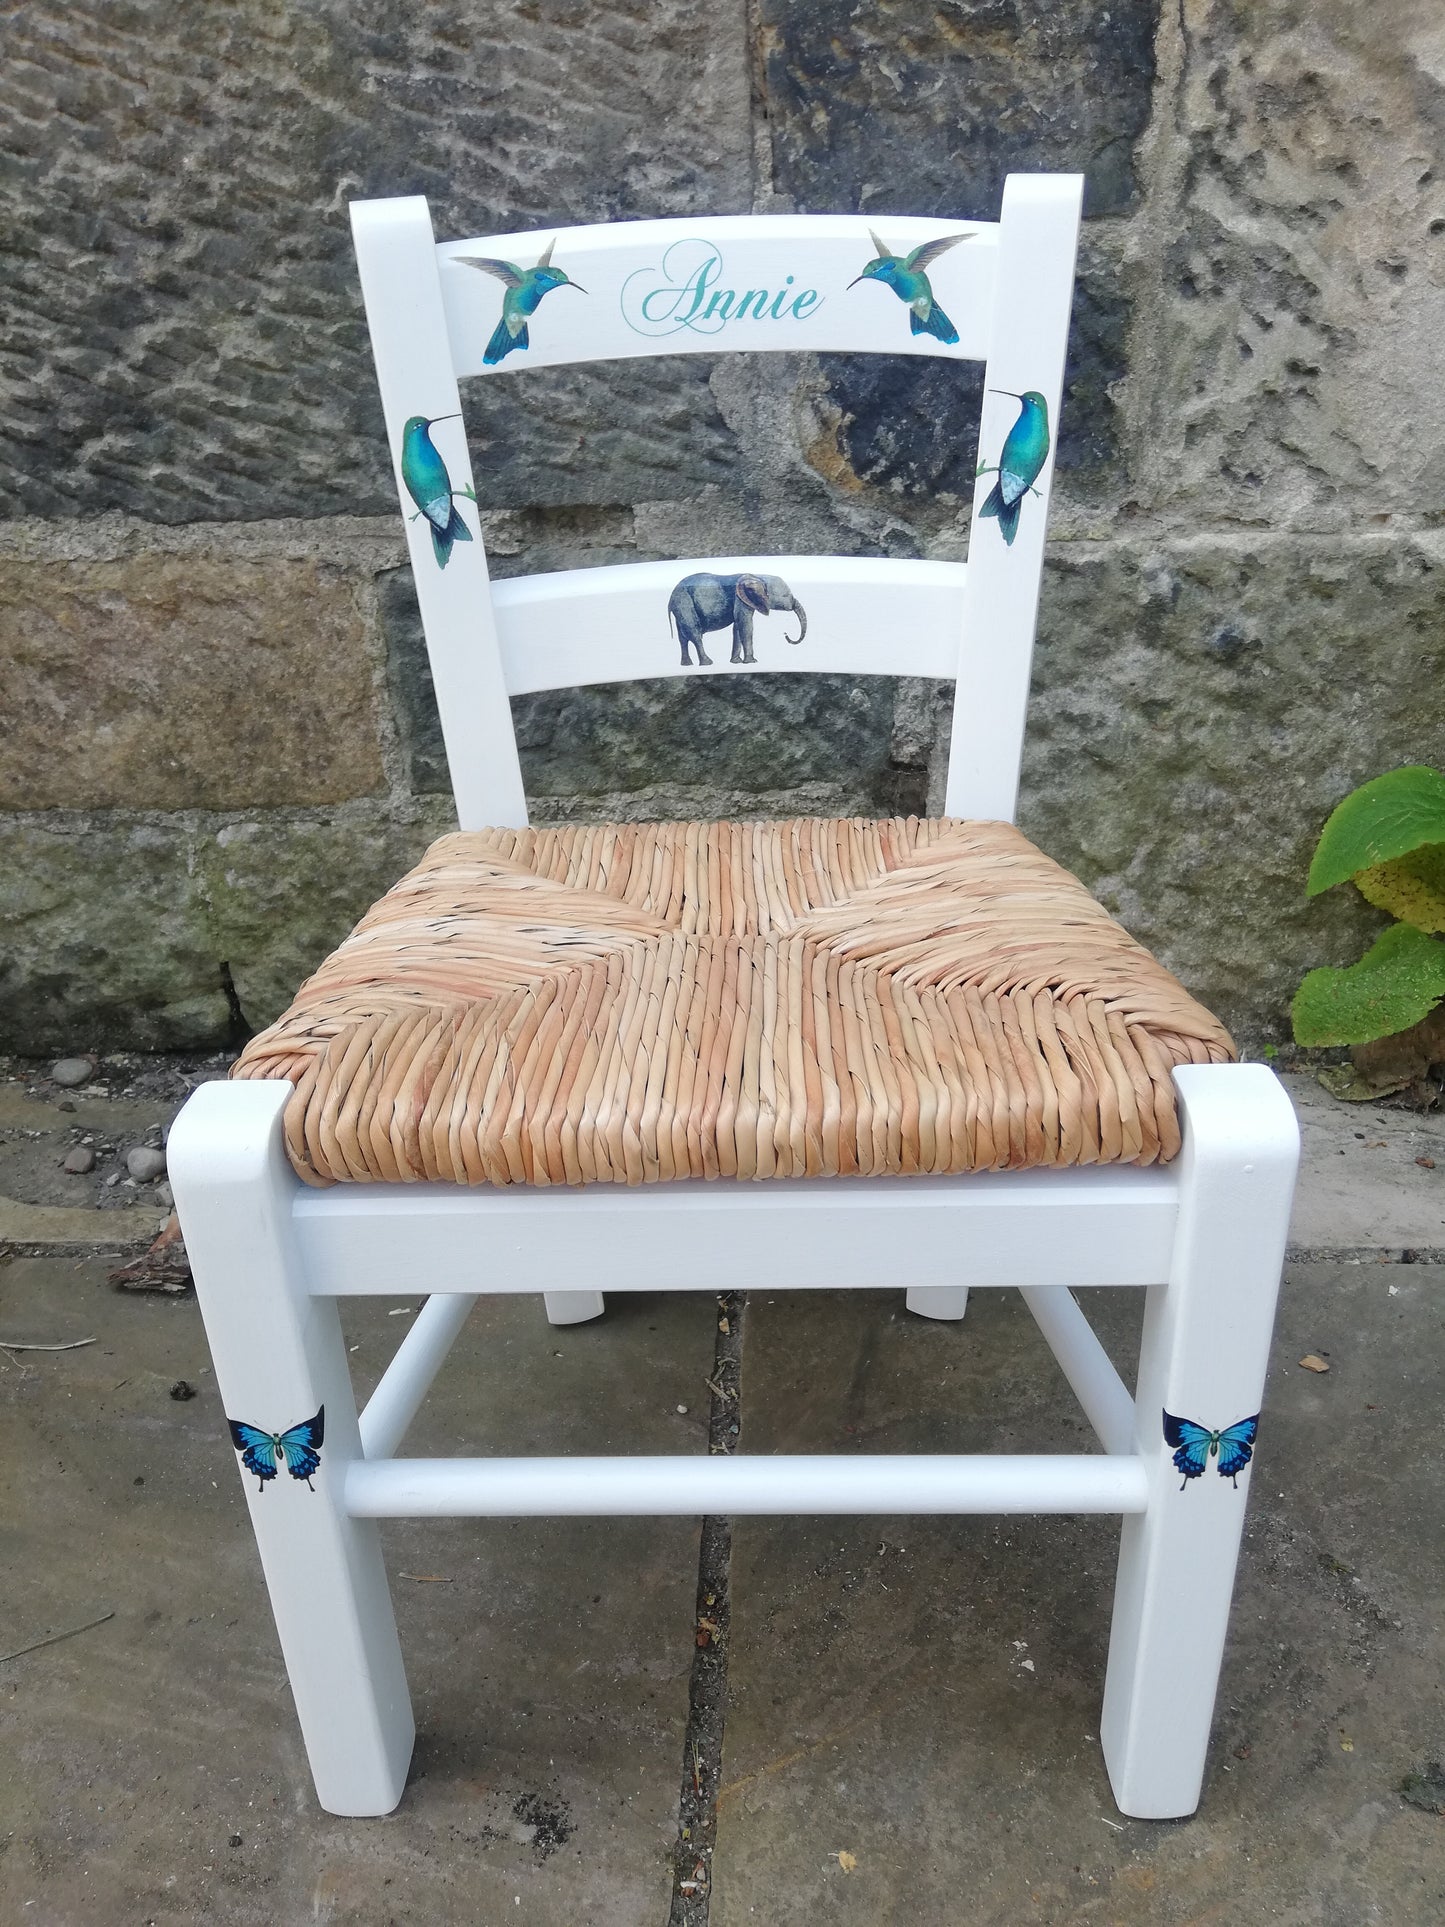 Upcycled rush seat personalised children's chair - hummingbird friend's theme  - made to order